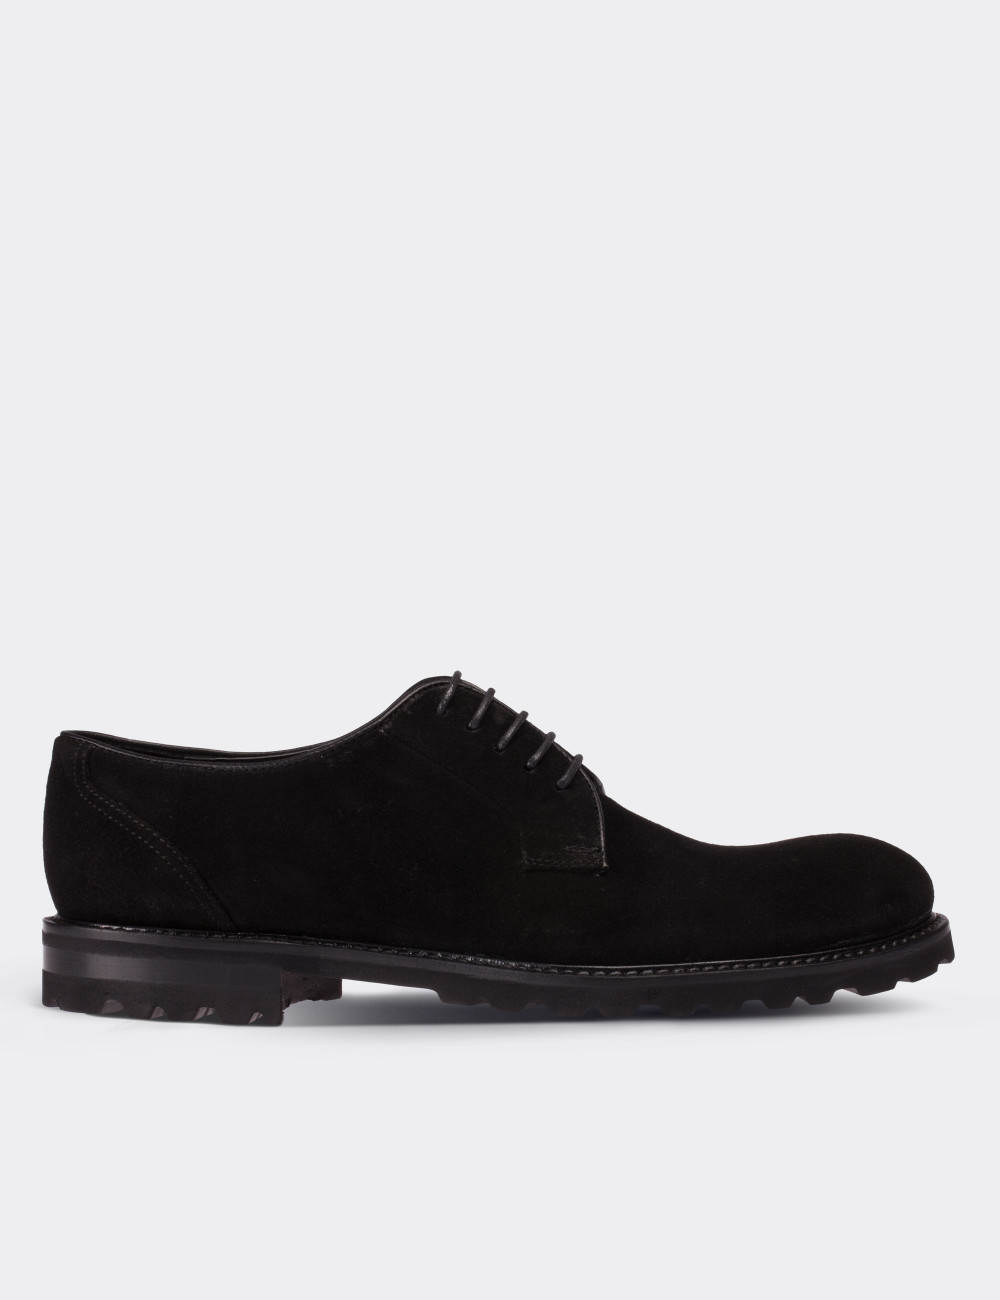 Black Suede Leather Lace-up Shoes - 01090MSYHE01